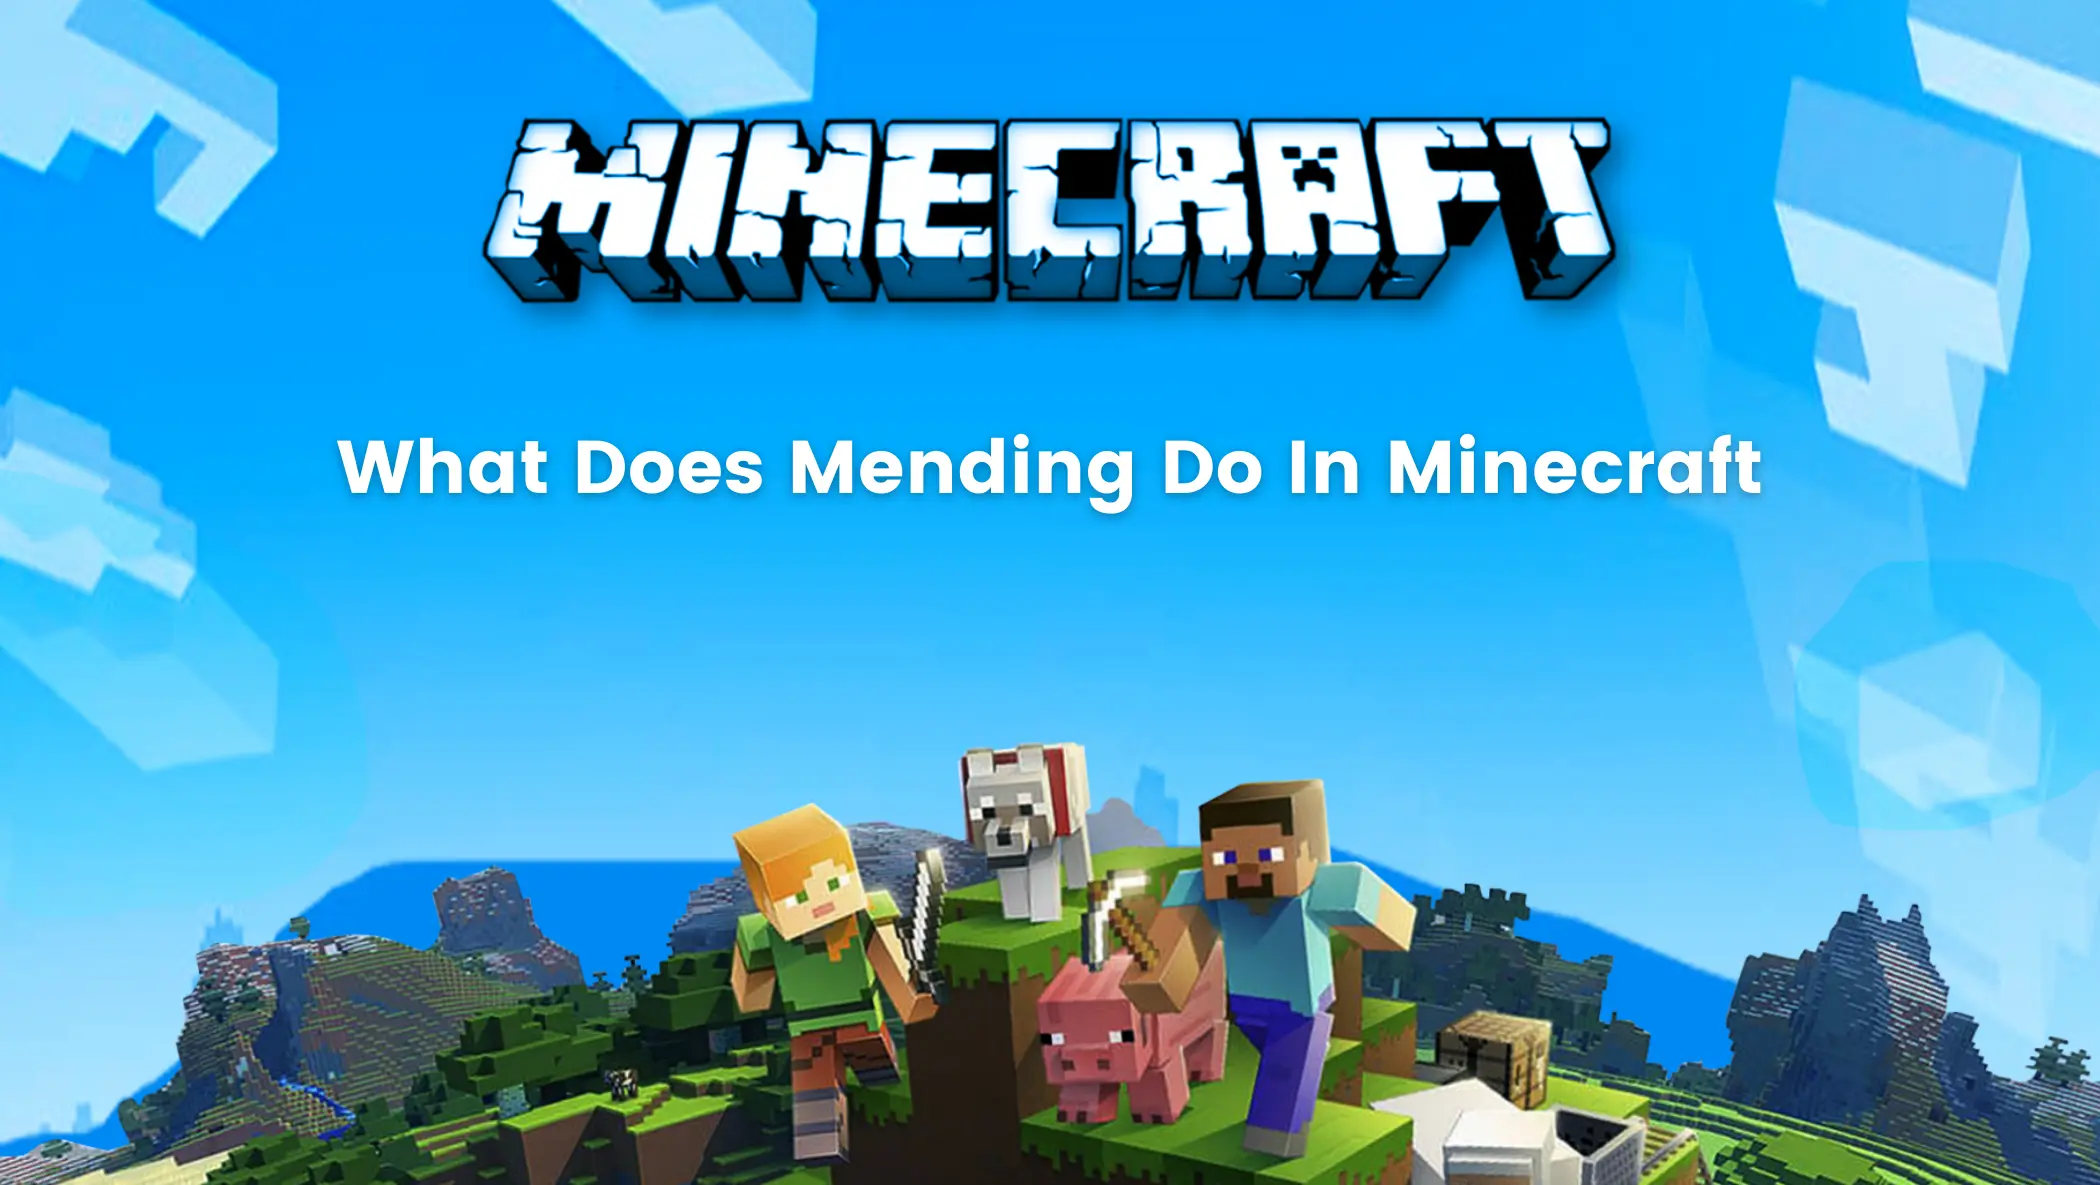 What Does Mending Do In Minecraft